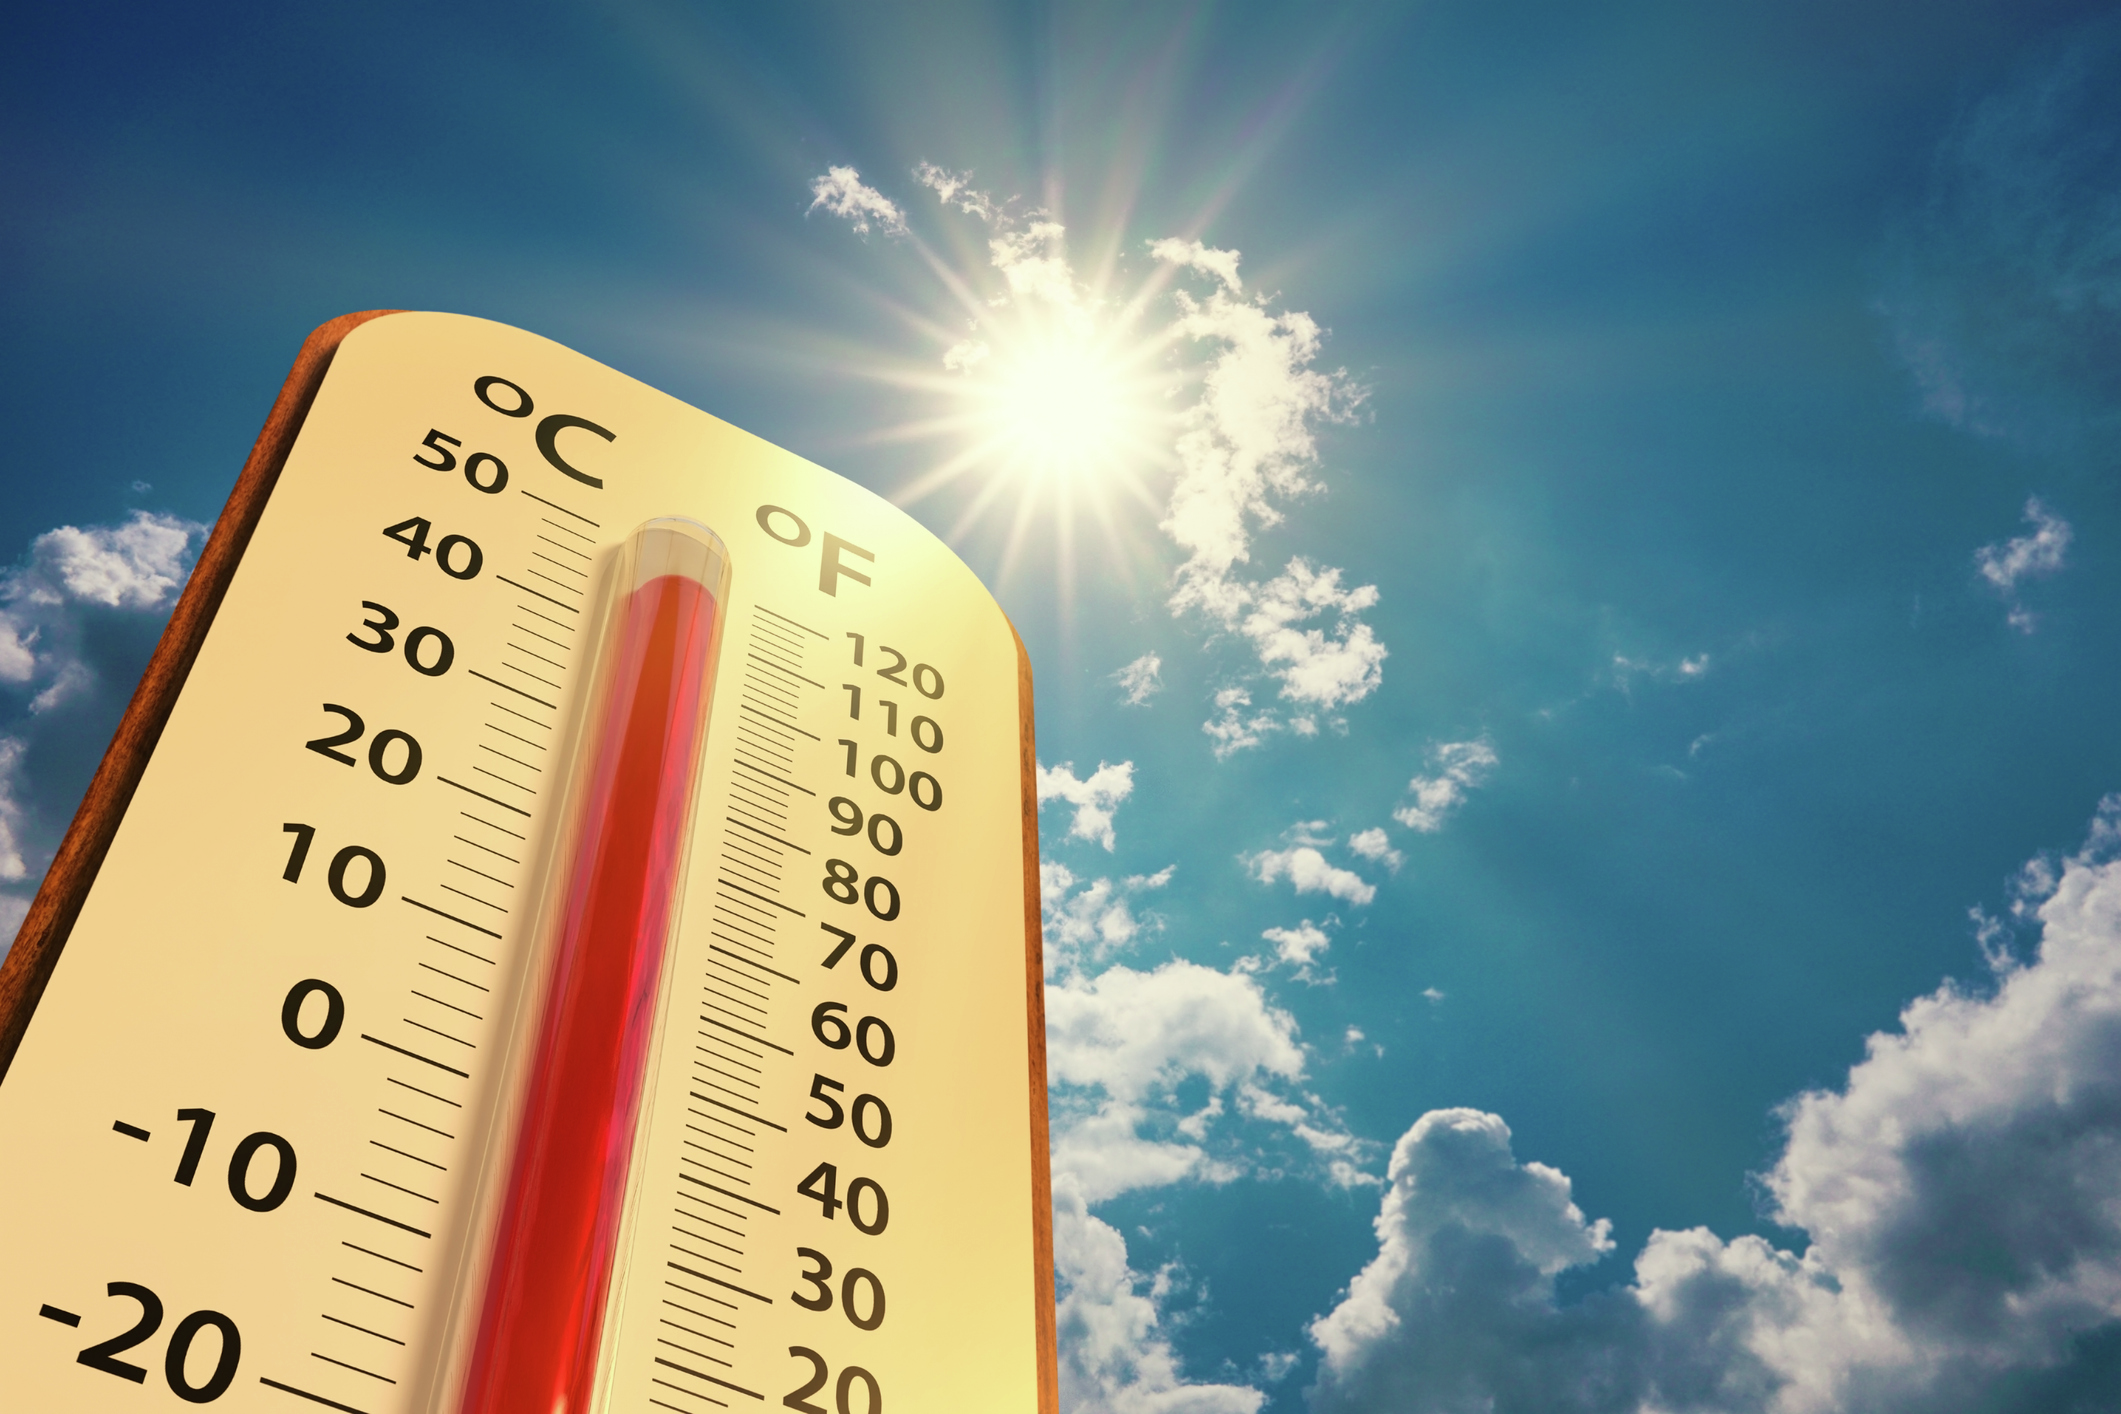 Metro Detroit reaches 90 degrees for the first time this July on the last day of the month